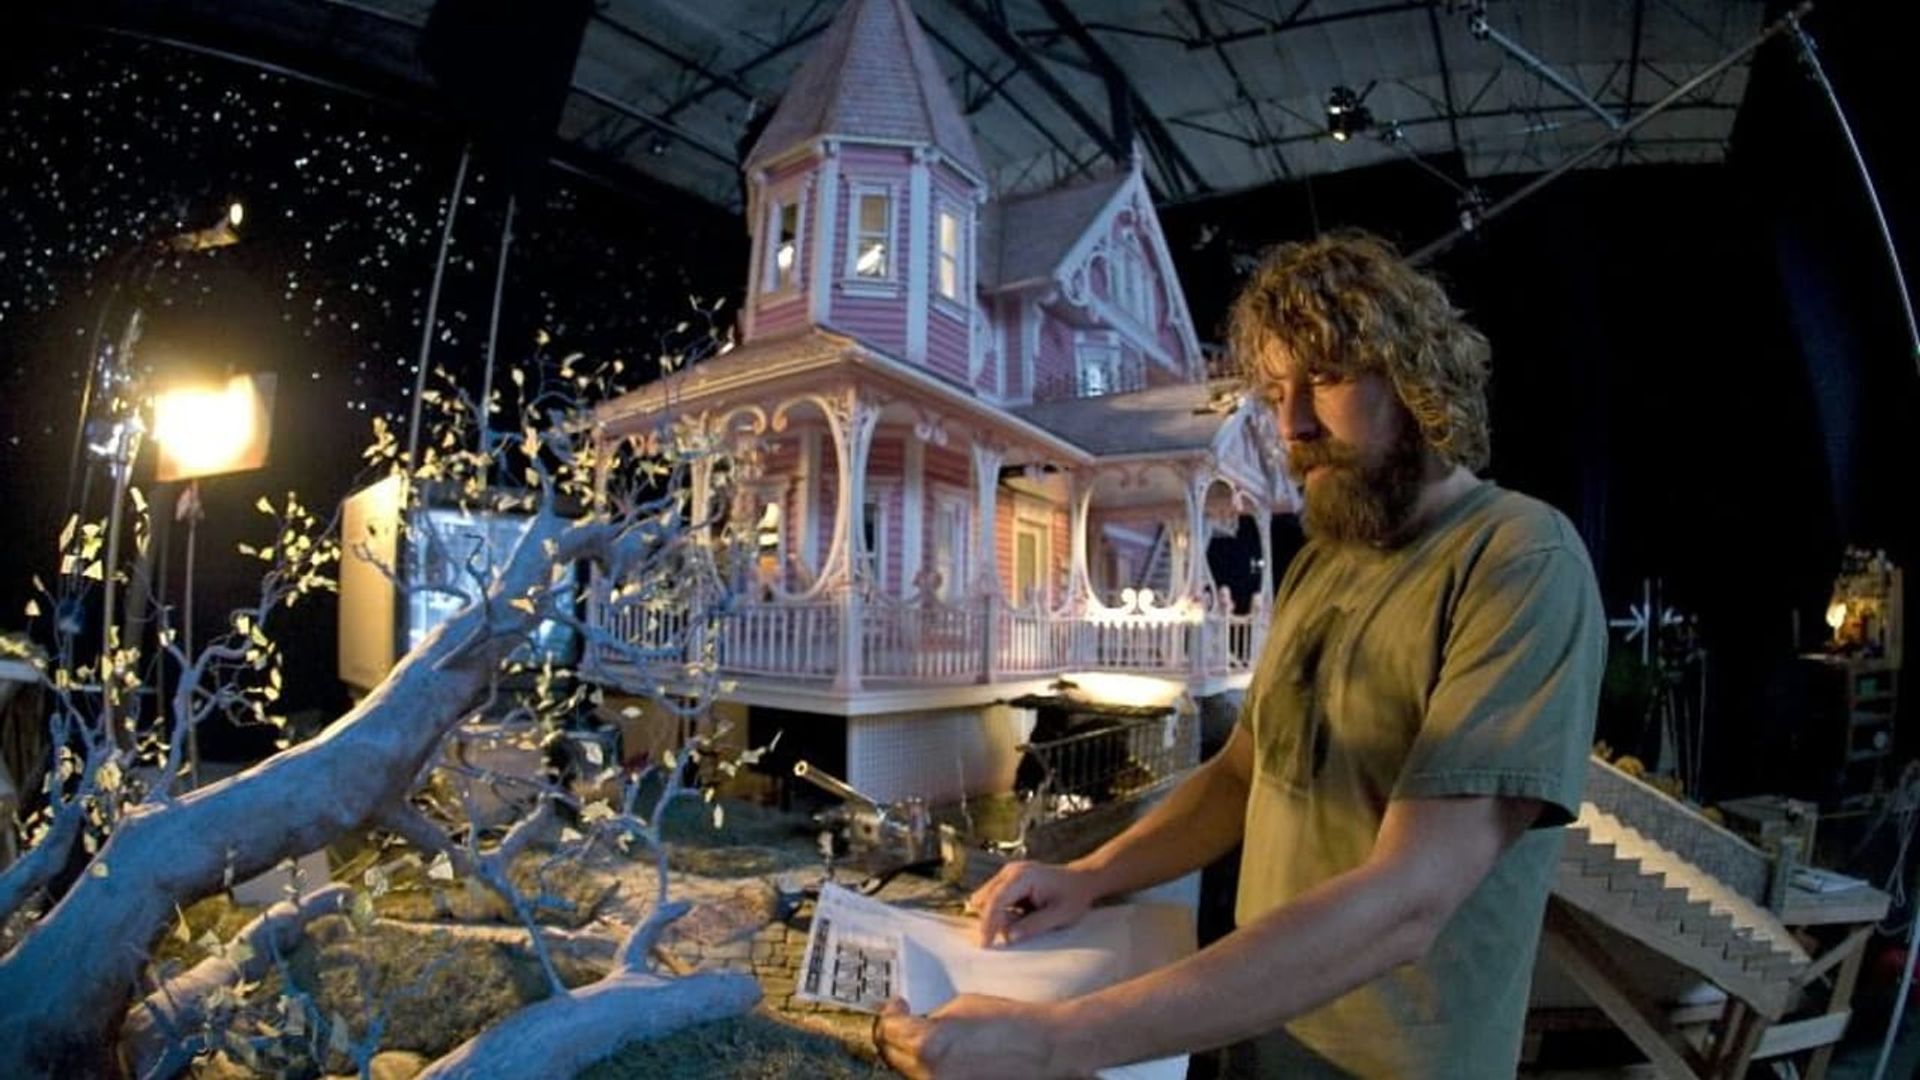 Coraline: The Making of 'Coraline' background